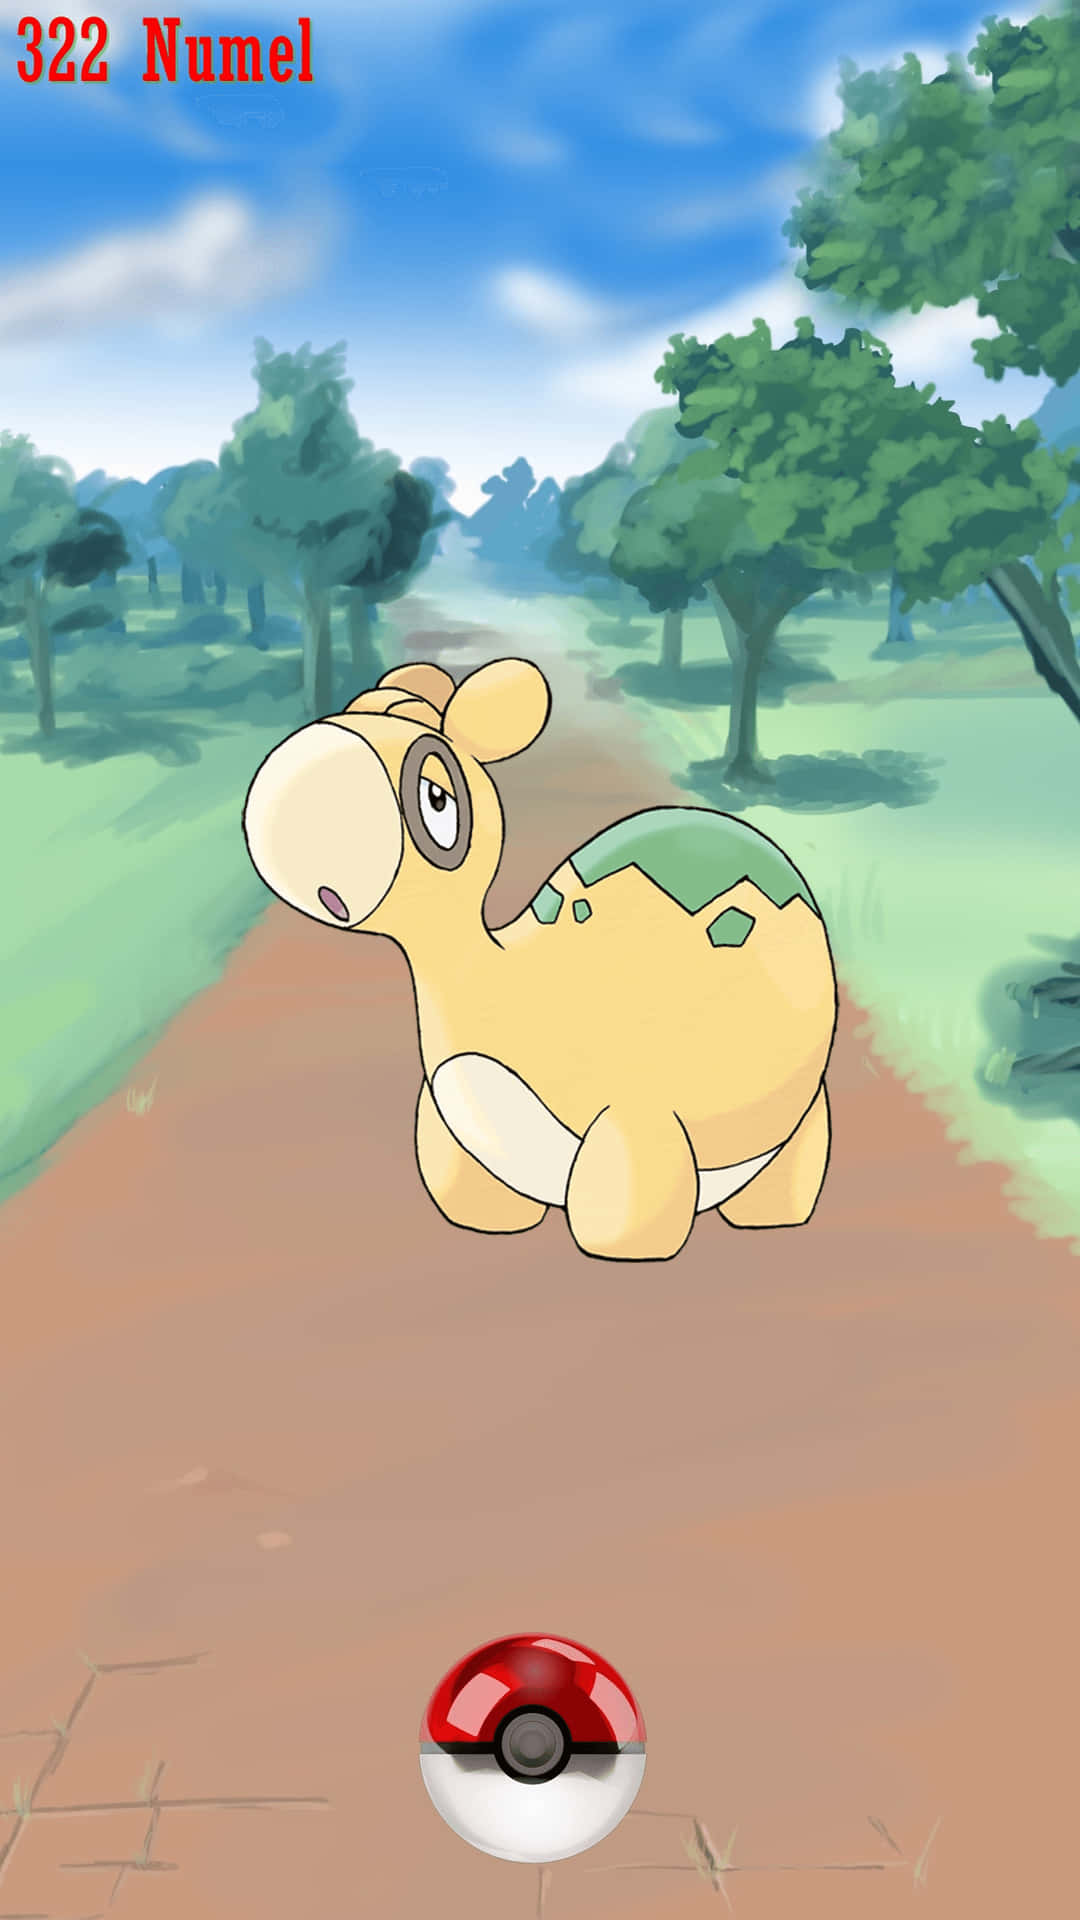 Numel On The Road Wallpaper